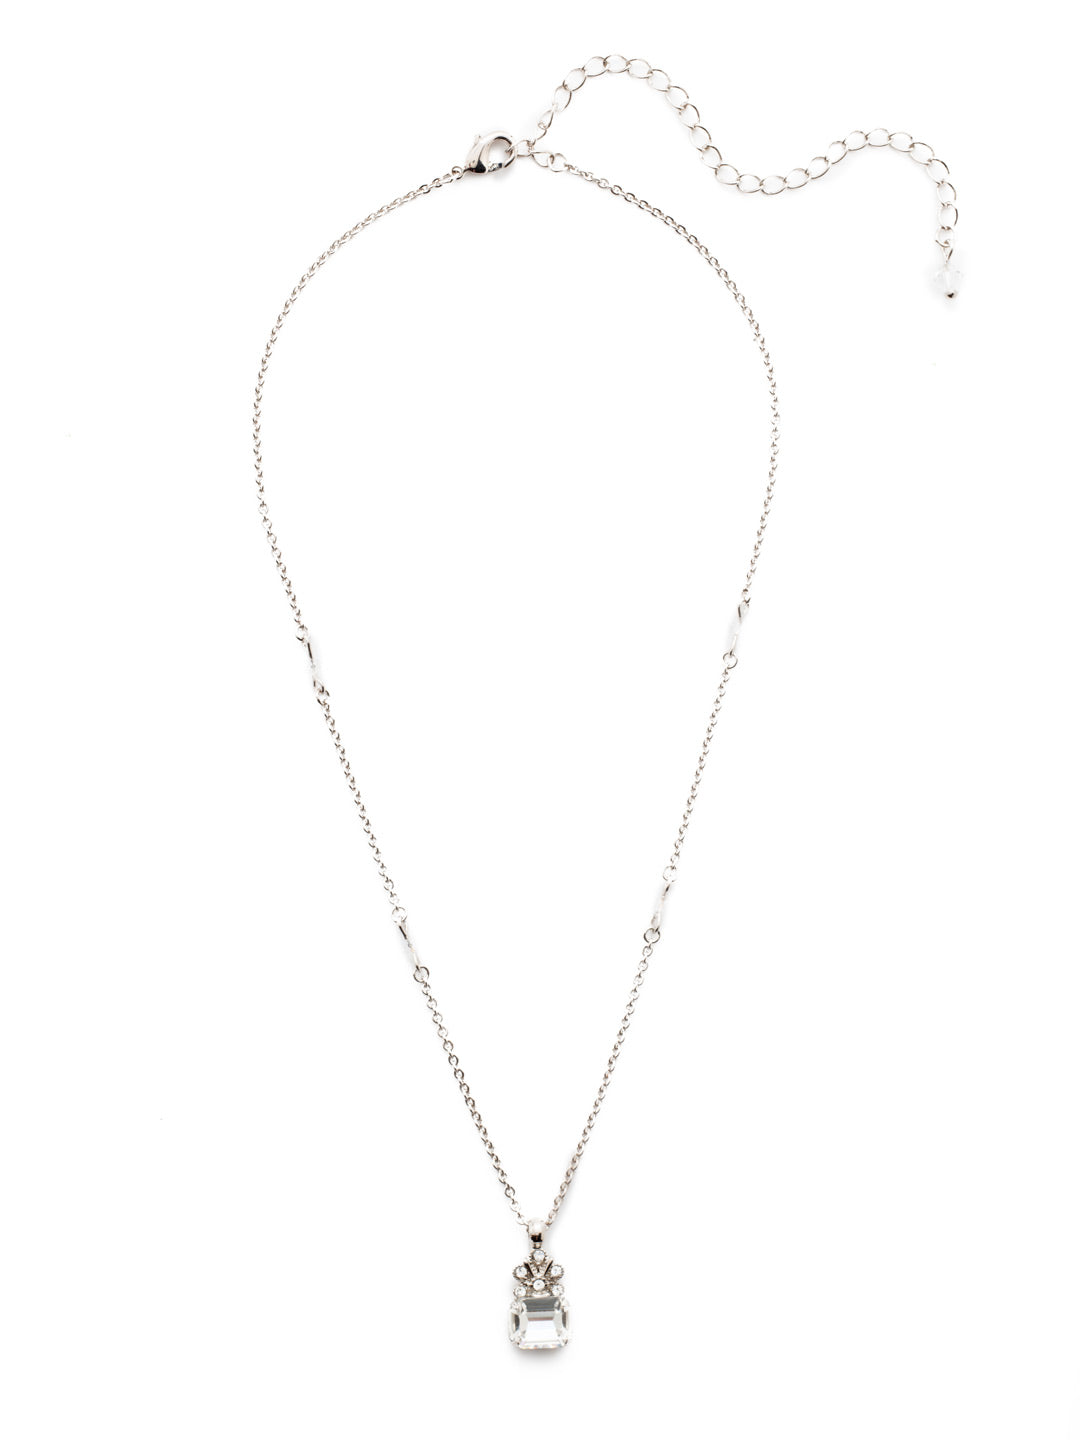 Crowning Glory Necklace - NDP9RHCRY - Sorrelli